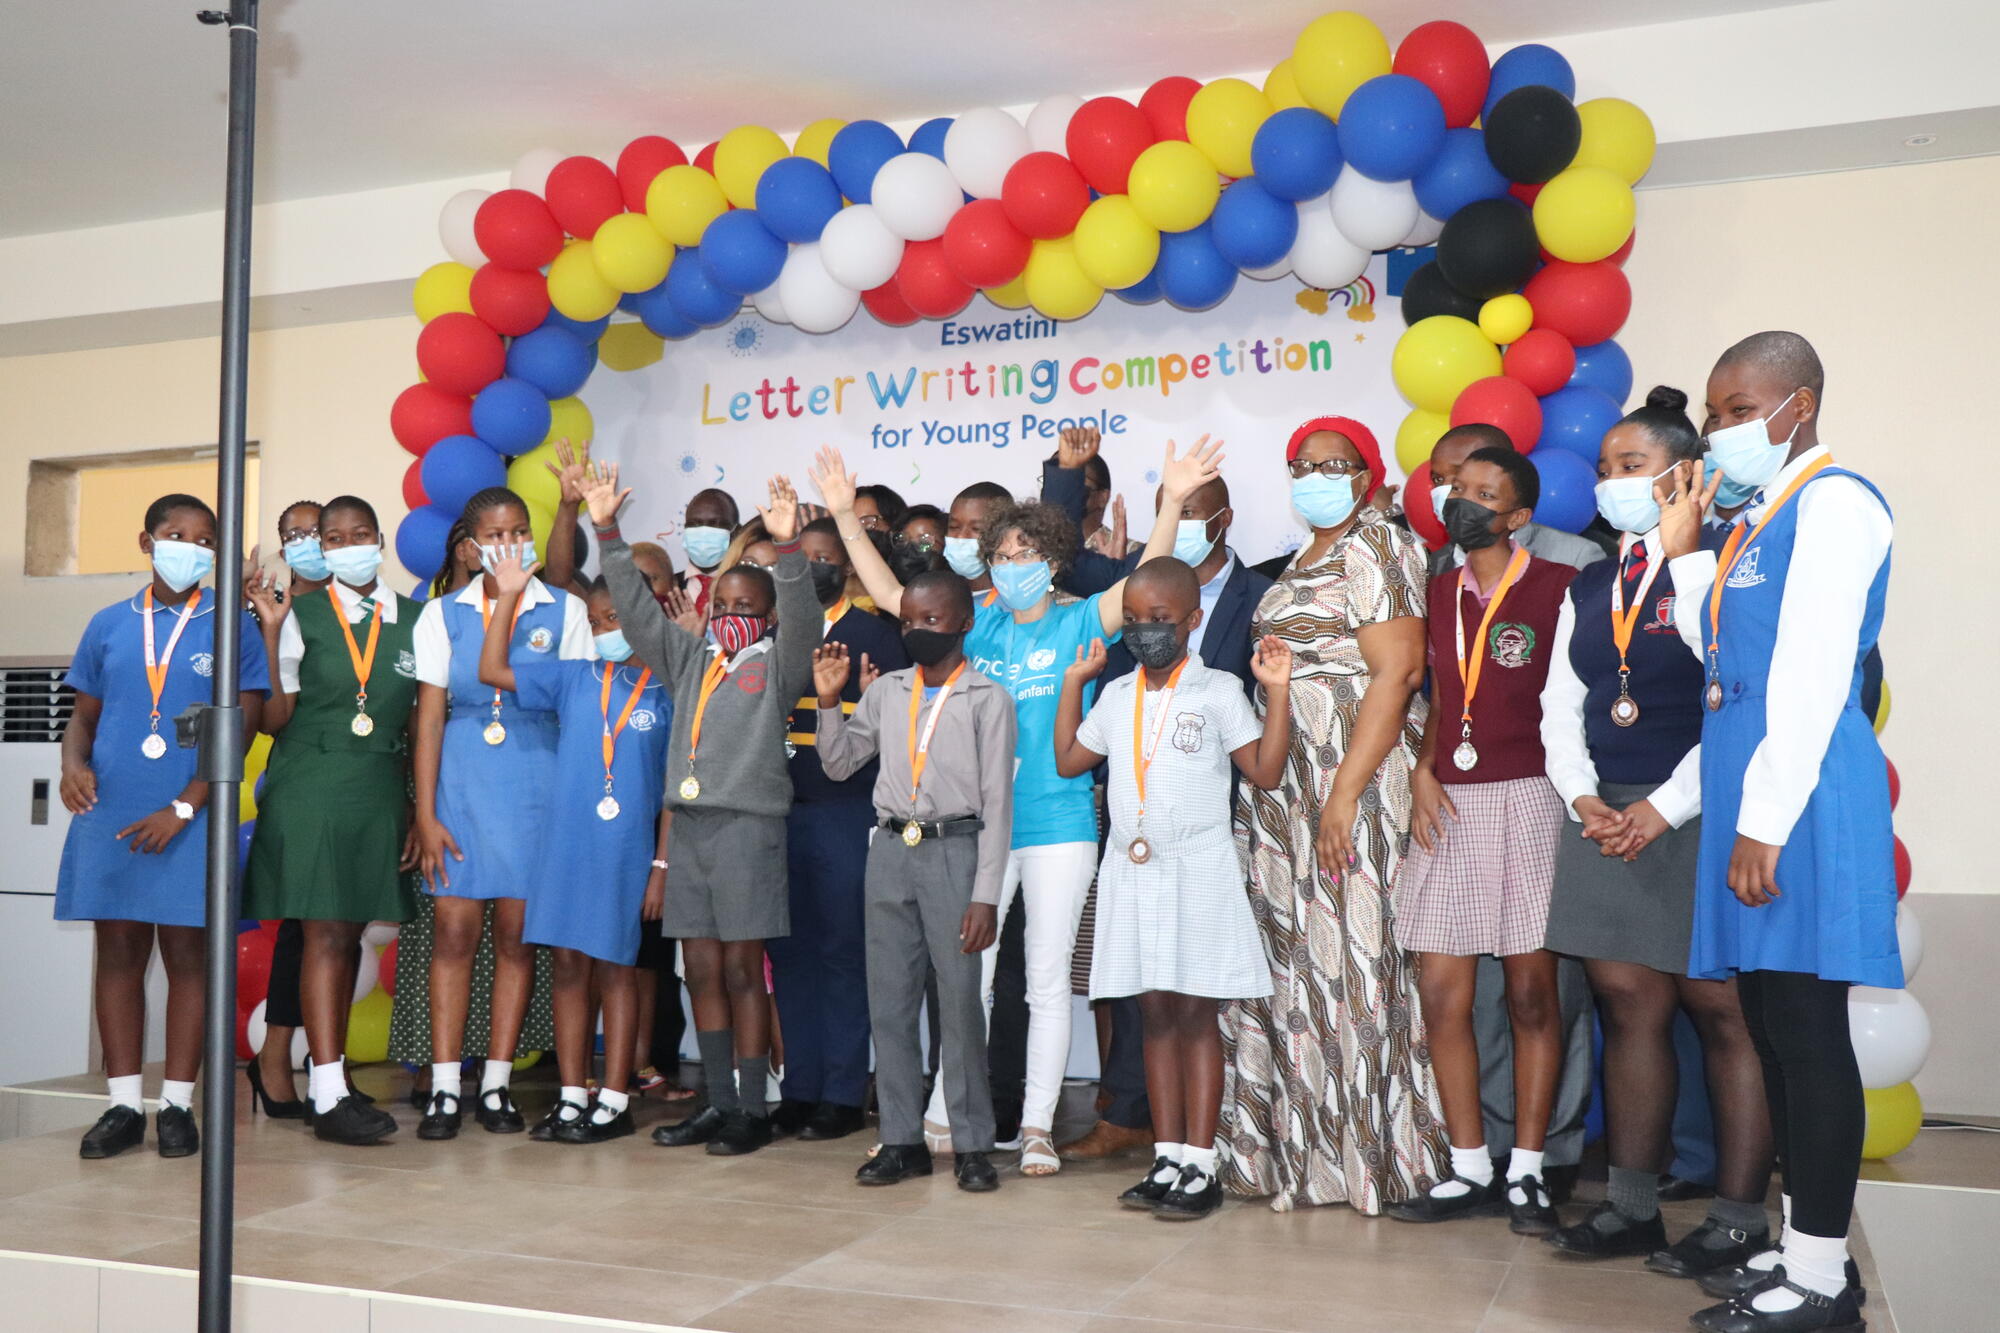 Eswatini’s national letter-writing competition